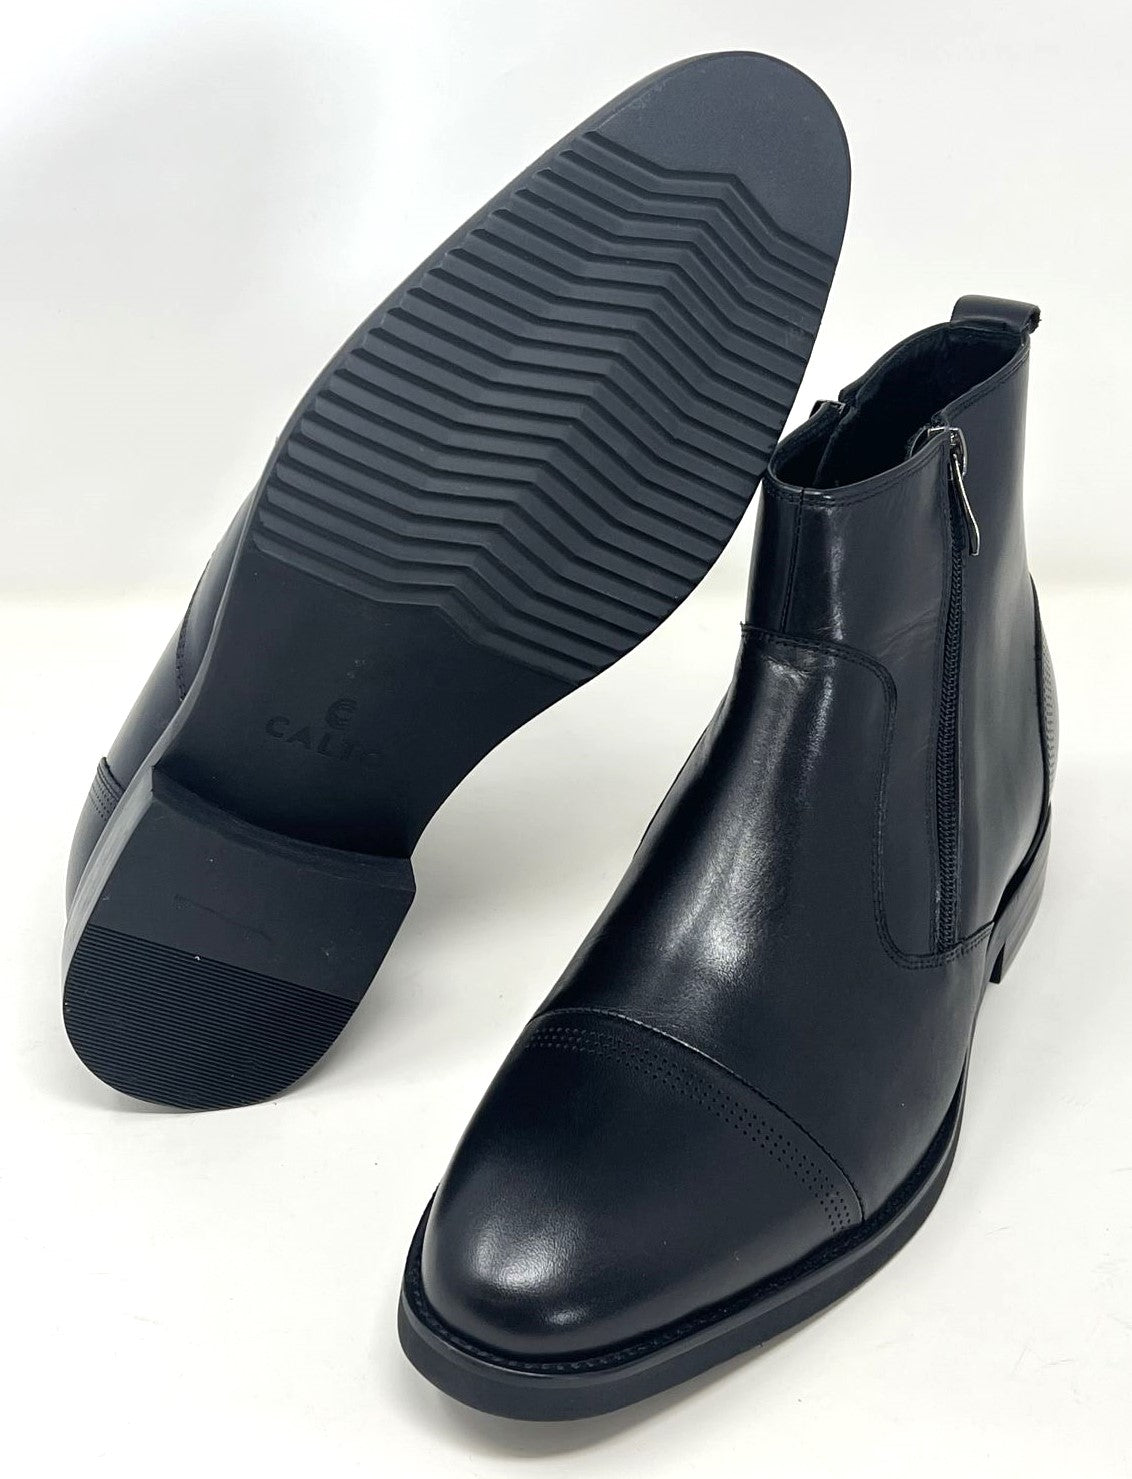 FSO0094 - 3.2 Inches Taller (Black) - Size 8 Only